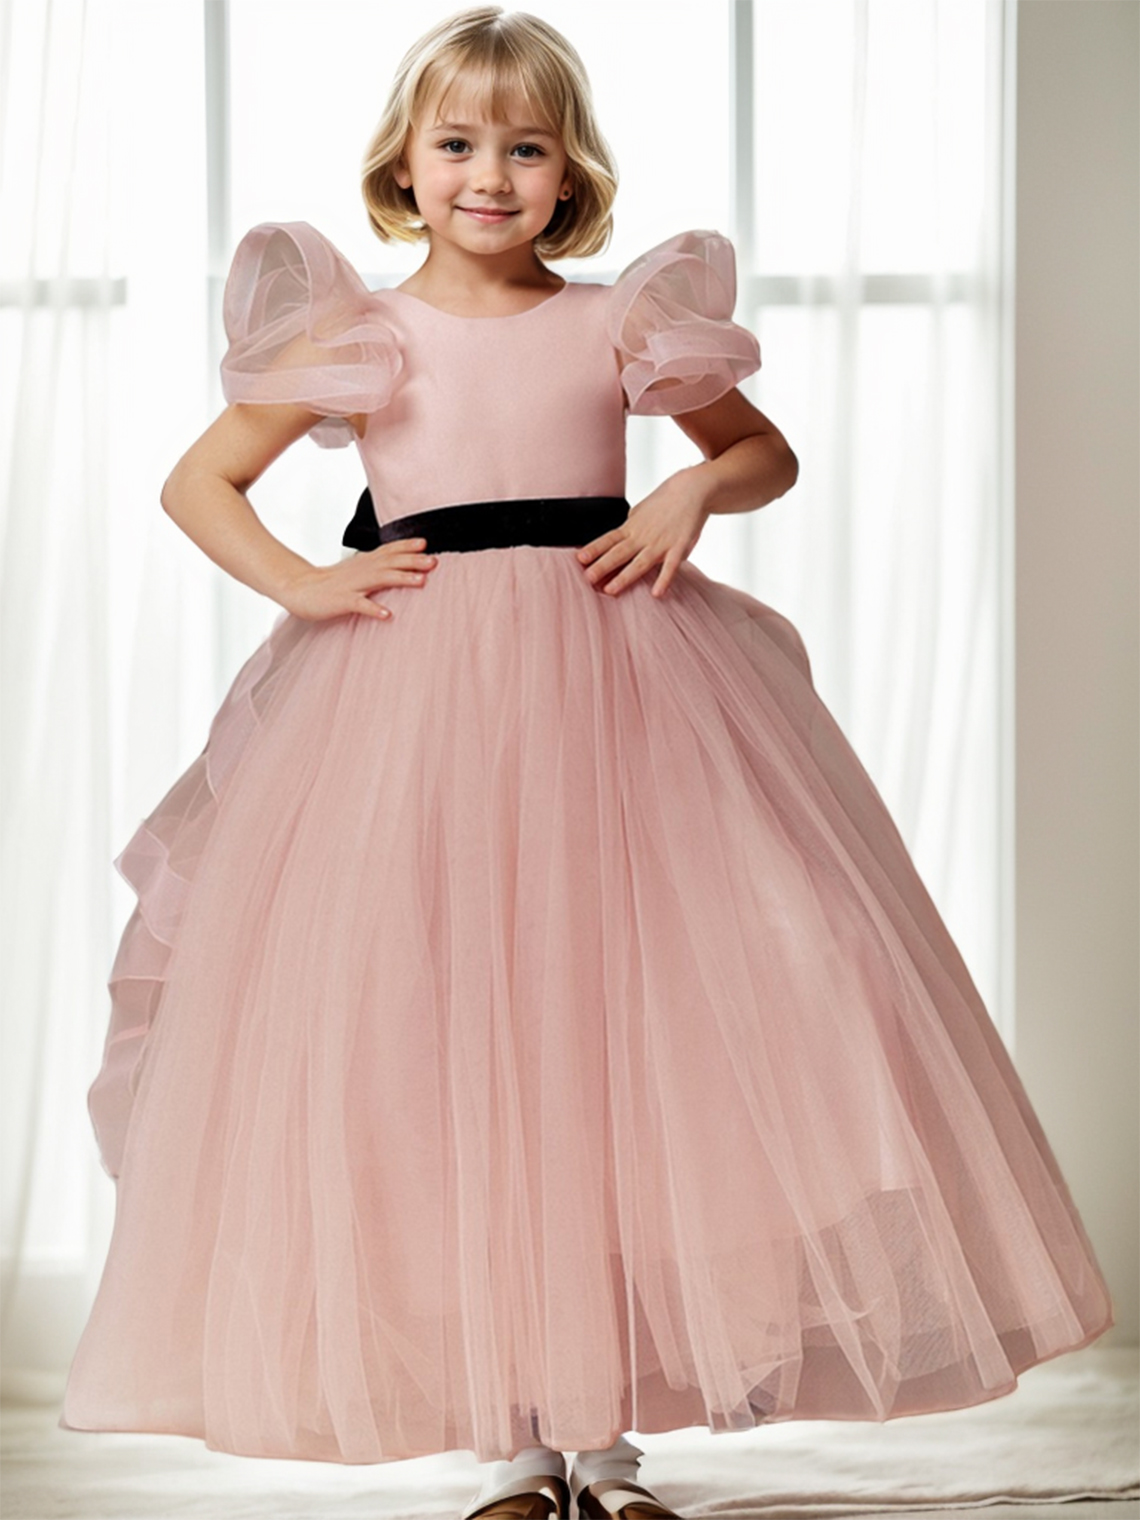 A-Line Sash/Ribbon Bow(s) Tiered Cute Flower Girl Dress 